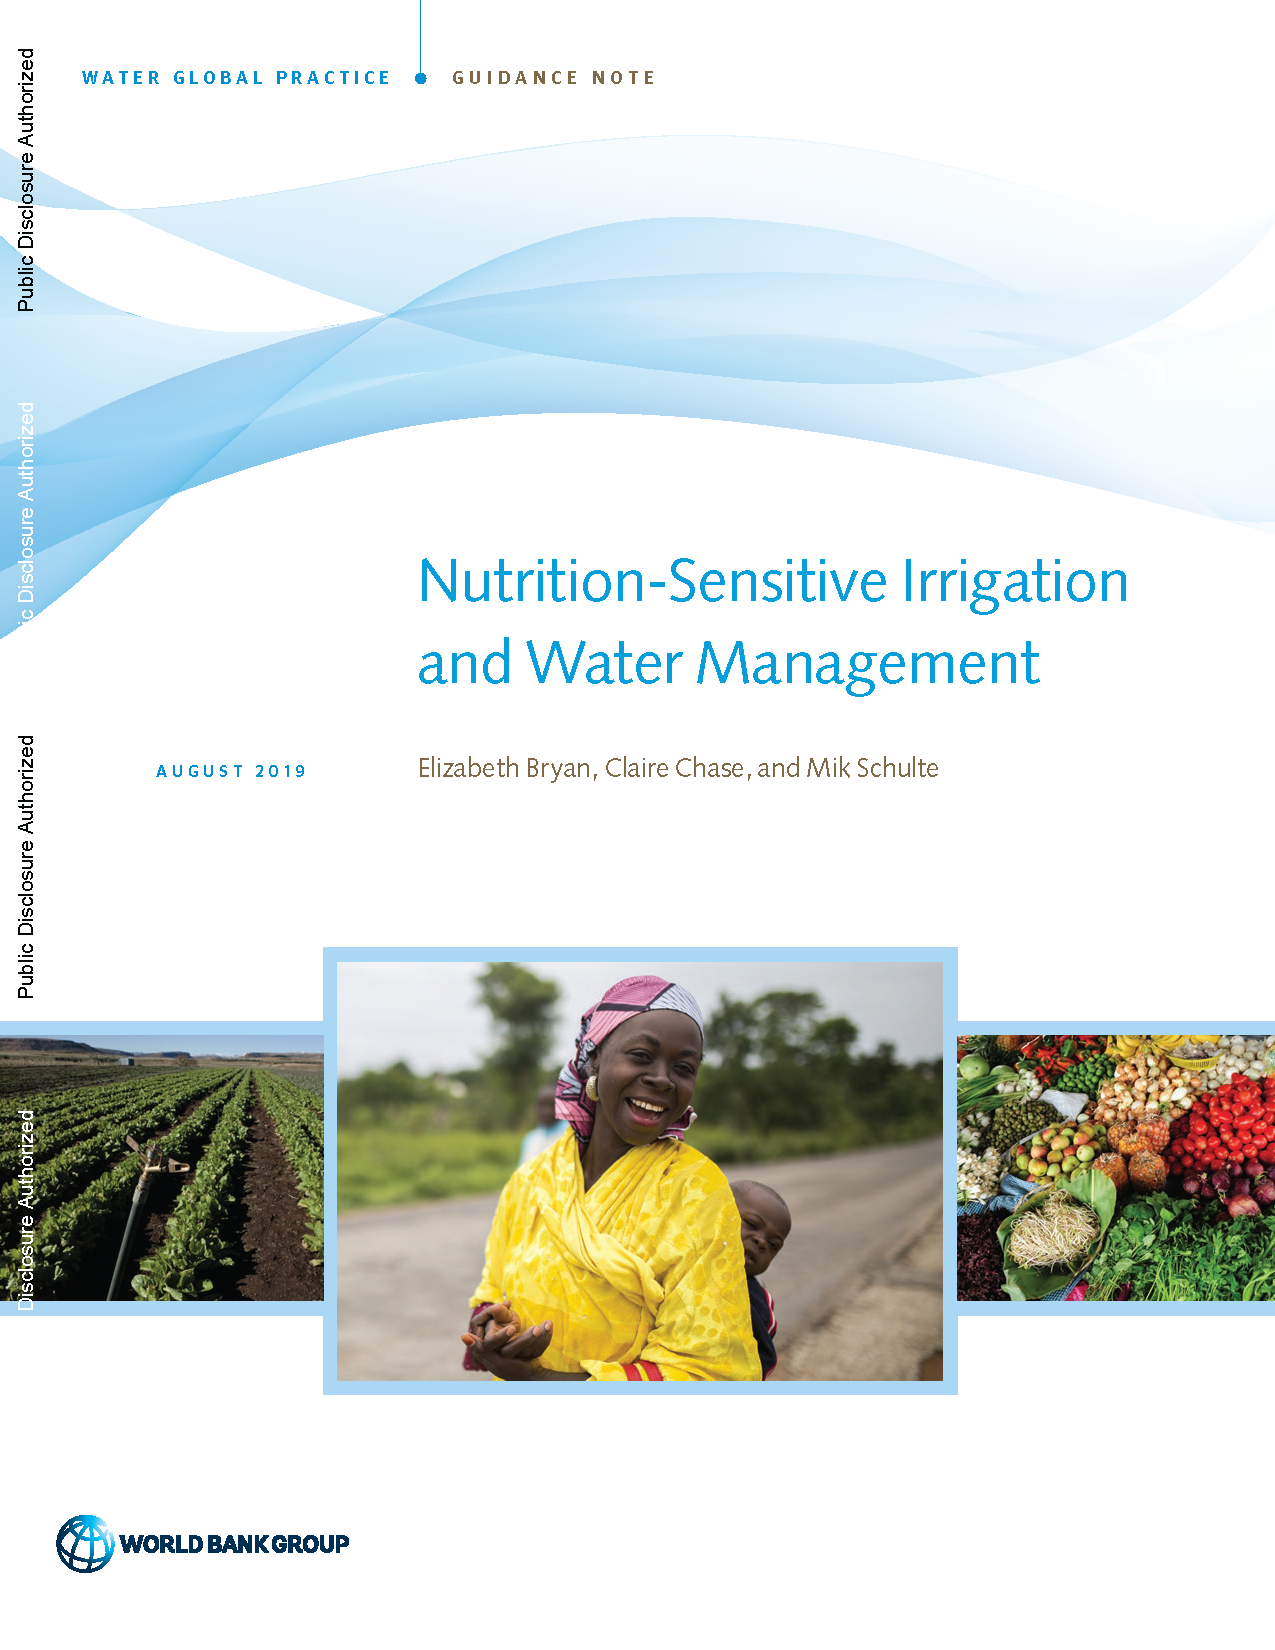 Cover page for Nutrition-Sensitive Irrigation and Water Management